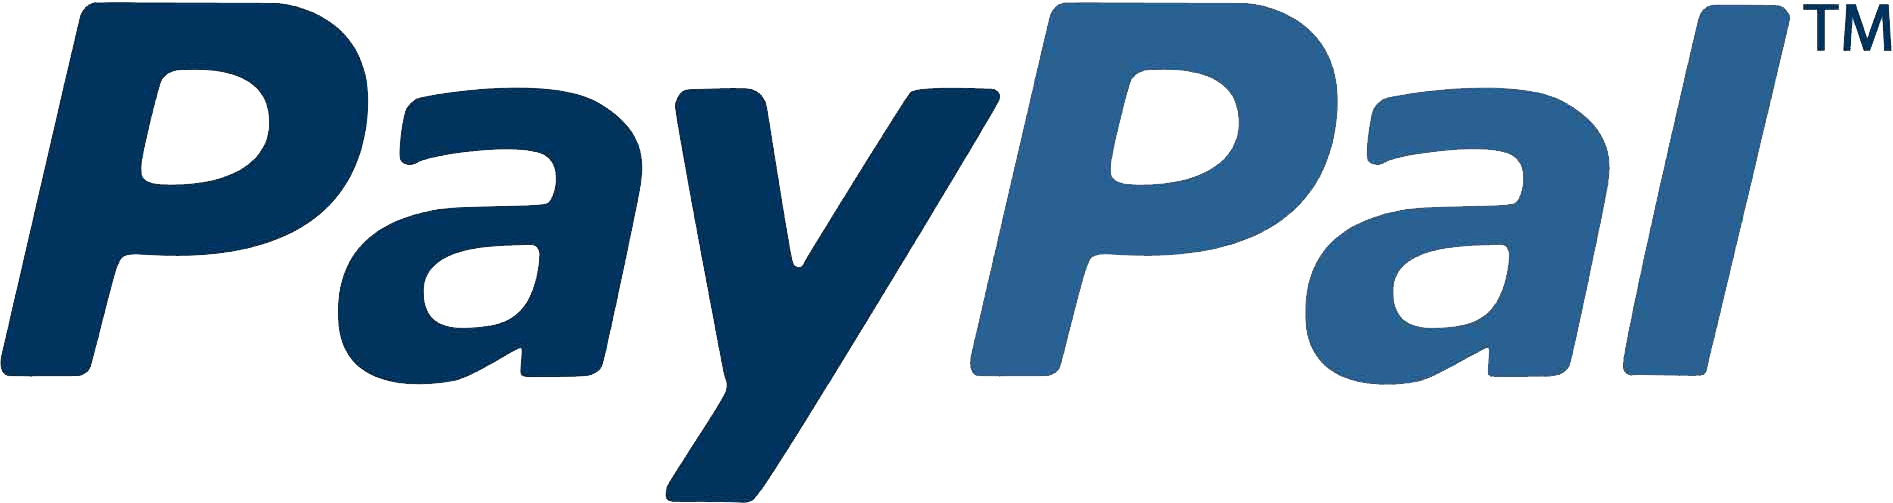 paypal logo text blue png 2132